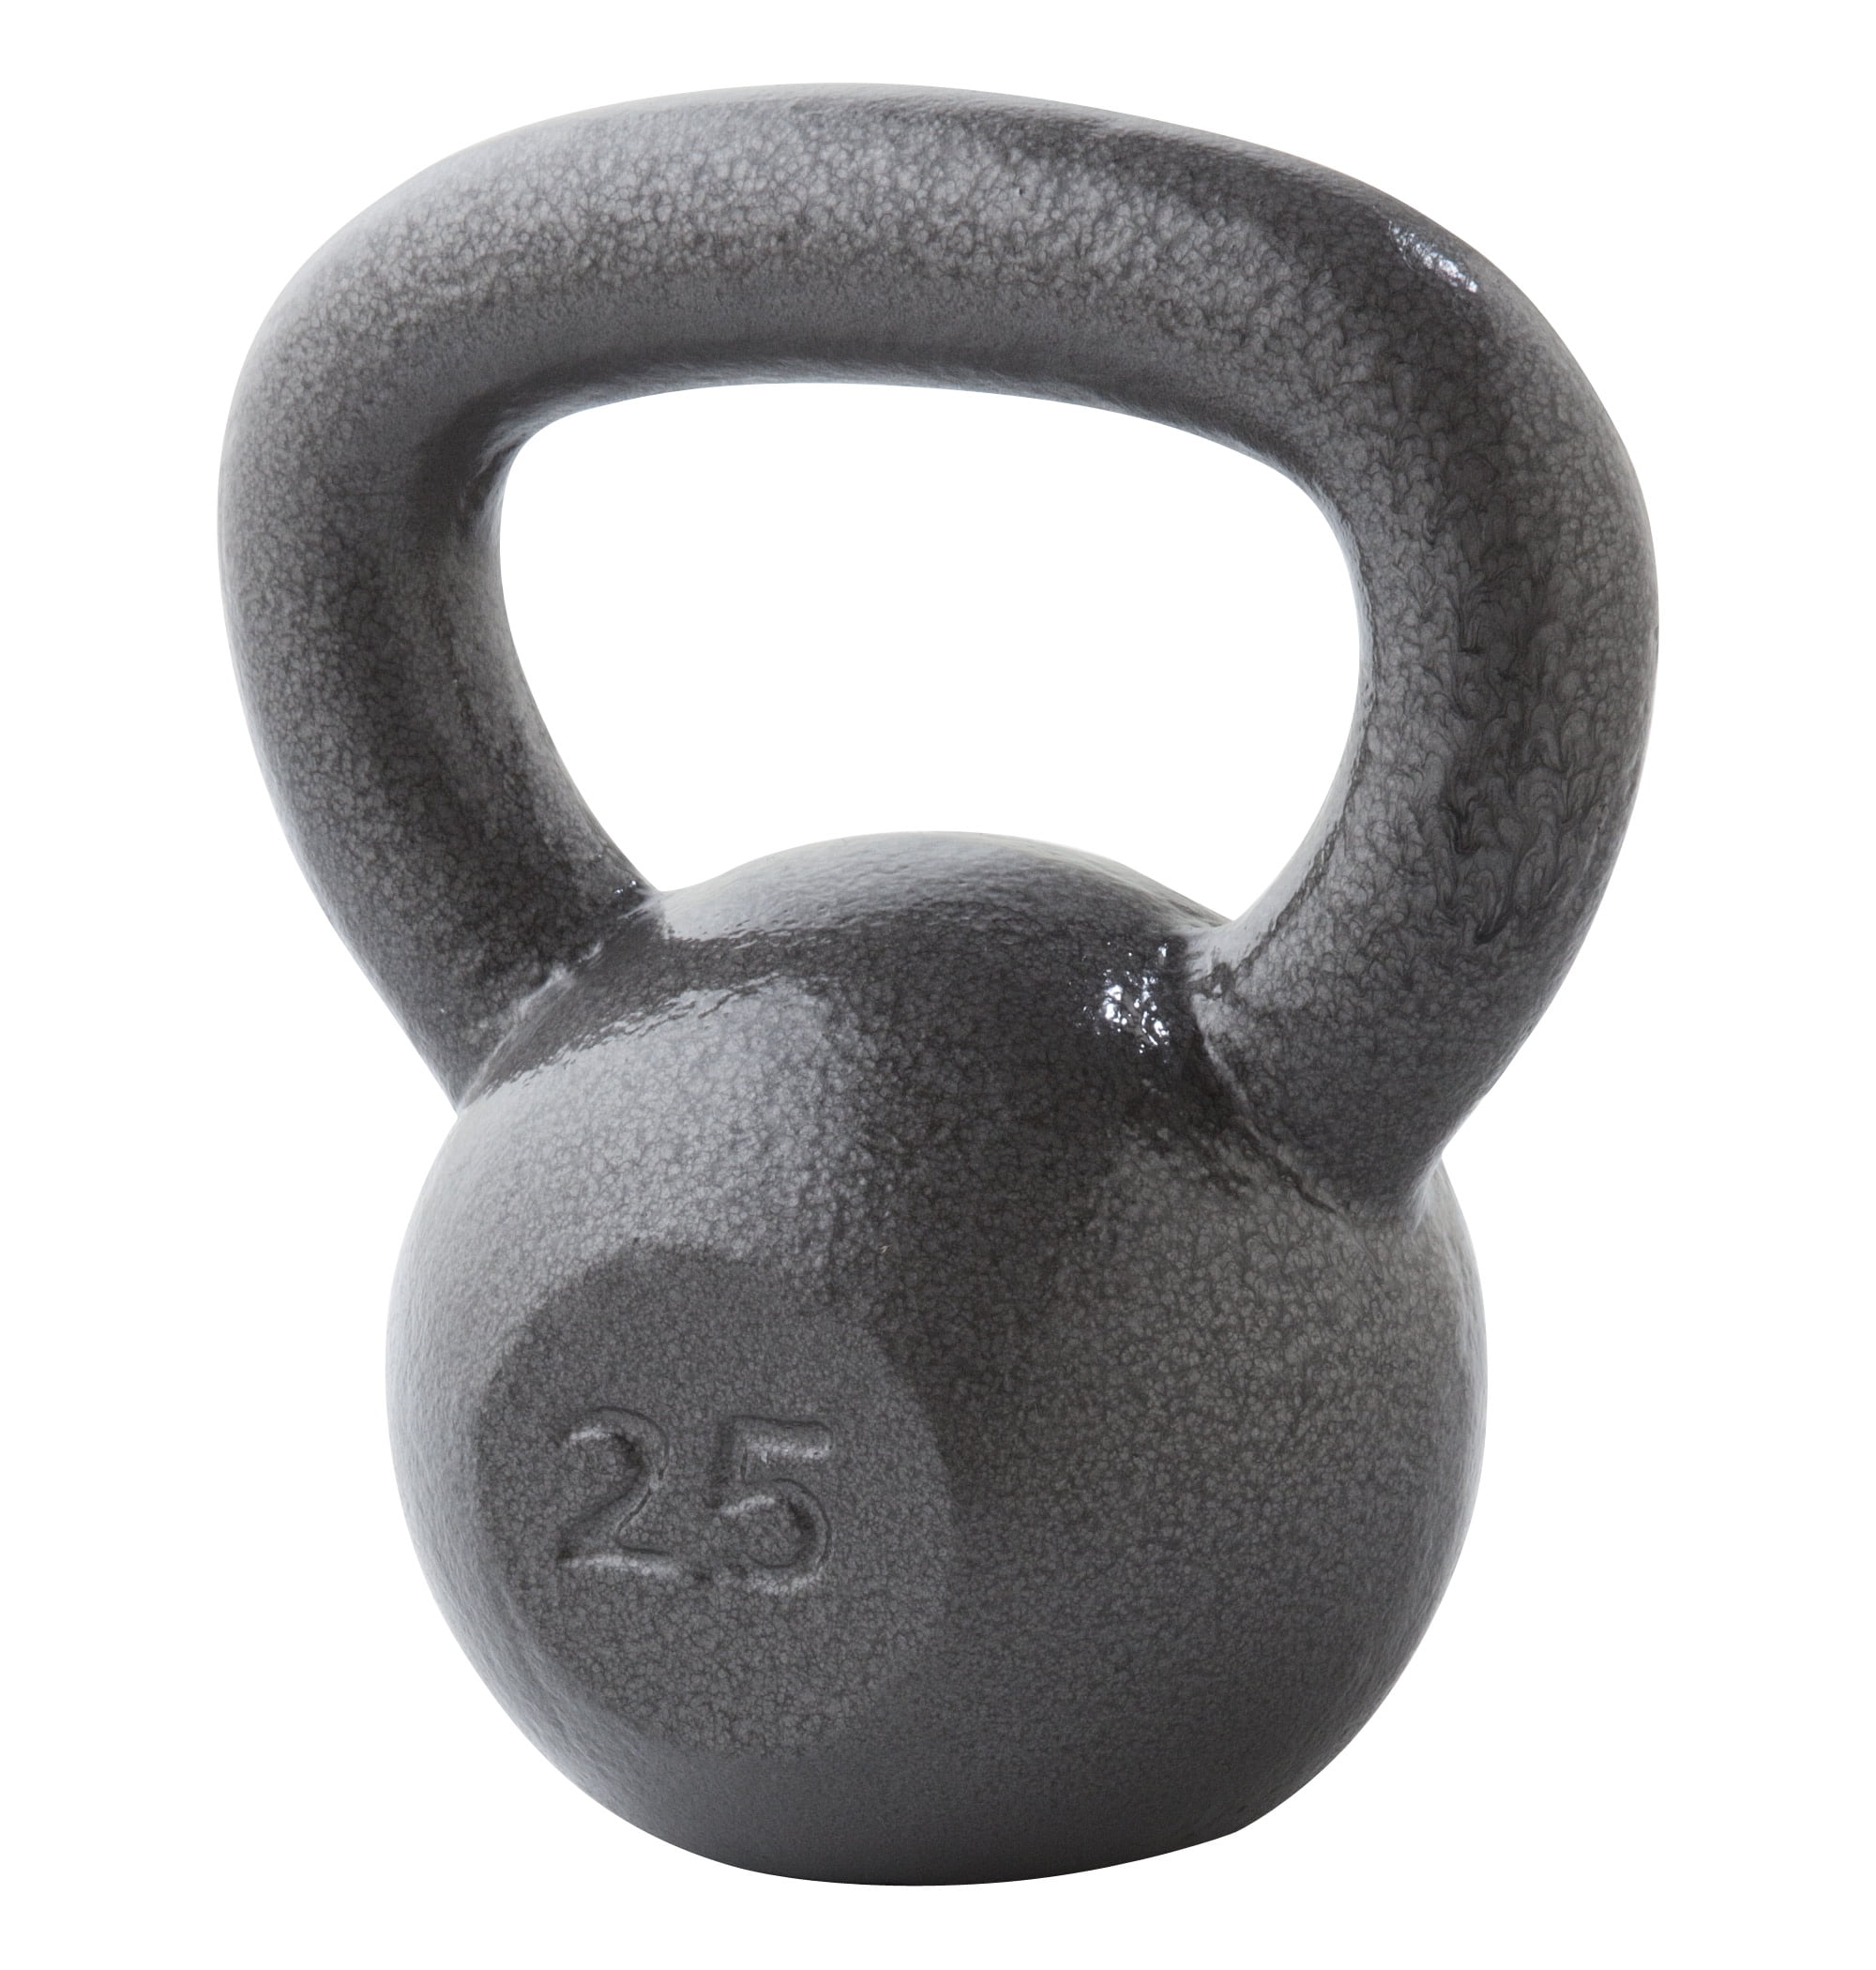 BRAND NEW 15LB VINYL DIPPED KETTLE BELL WEIGHT FOR COMMERCIAL GYM 100% IRON! 